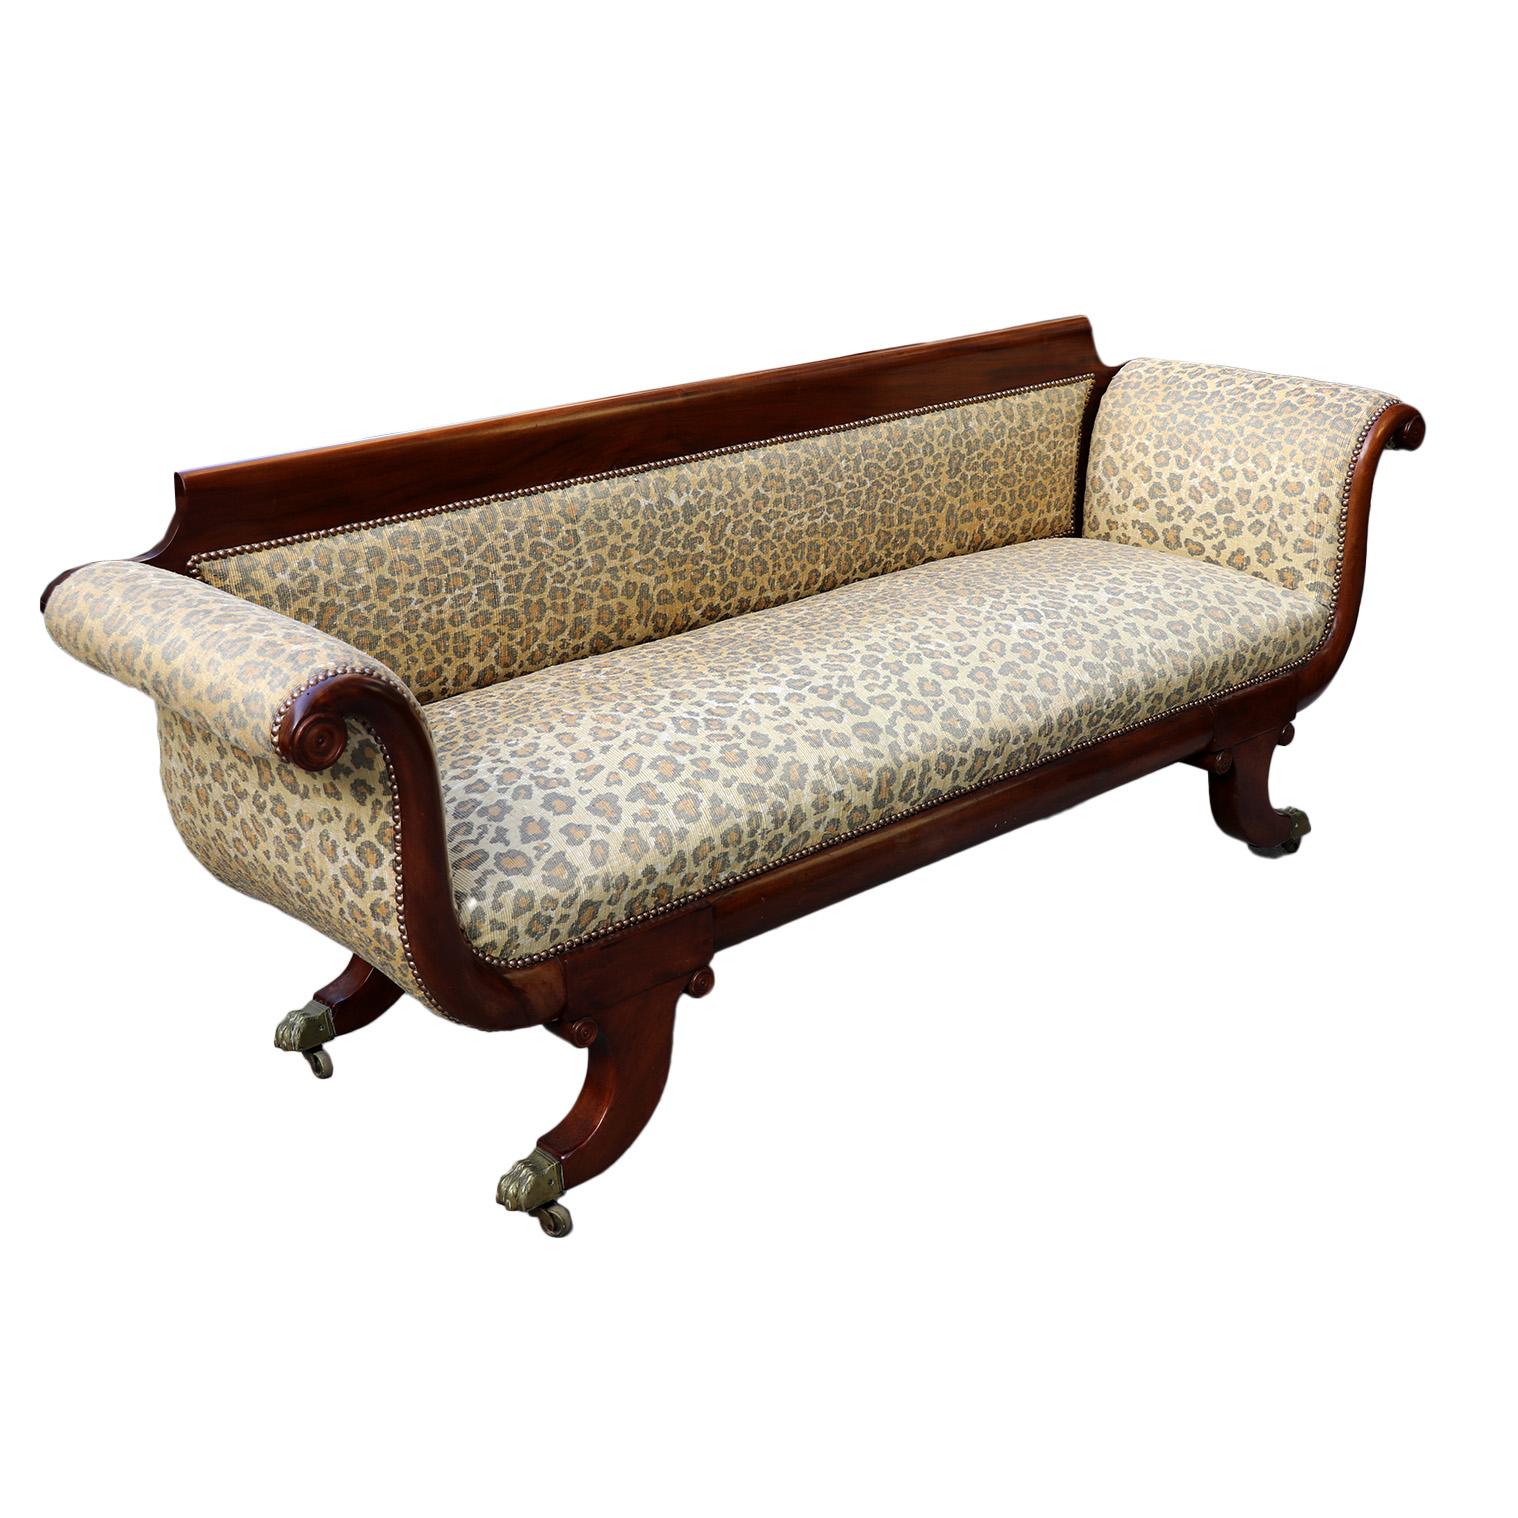 Vintage Animal Pattern Chaise Lounge In Good Condition For Sale In San Francisco, CA